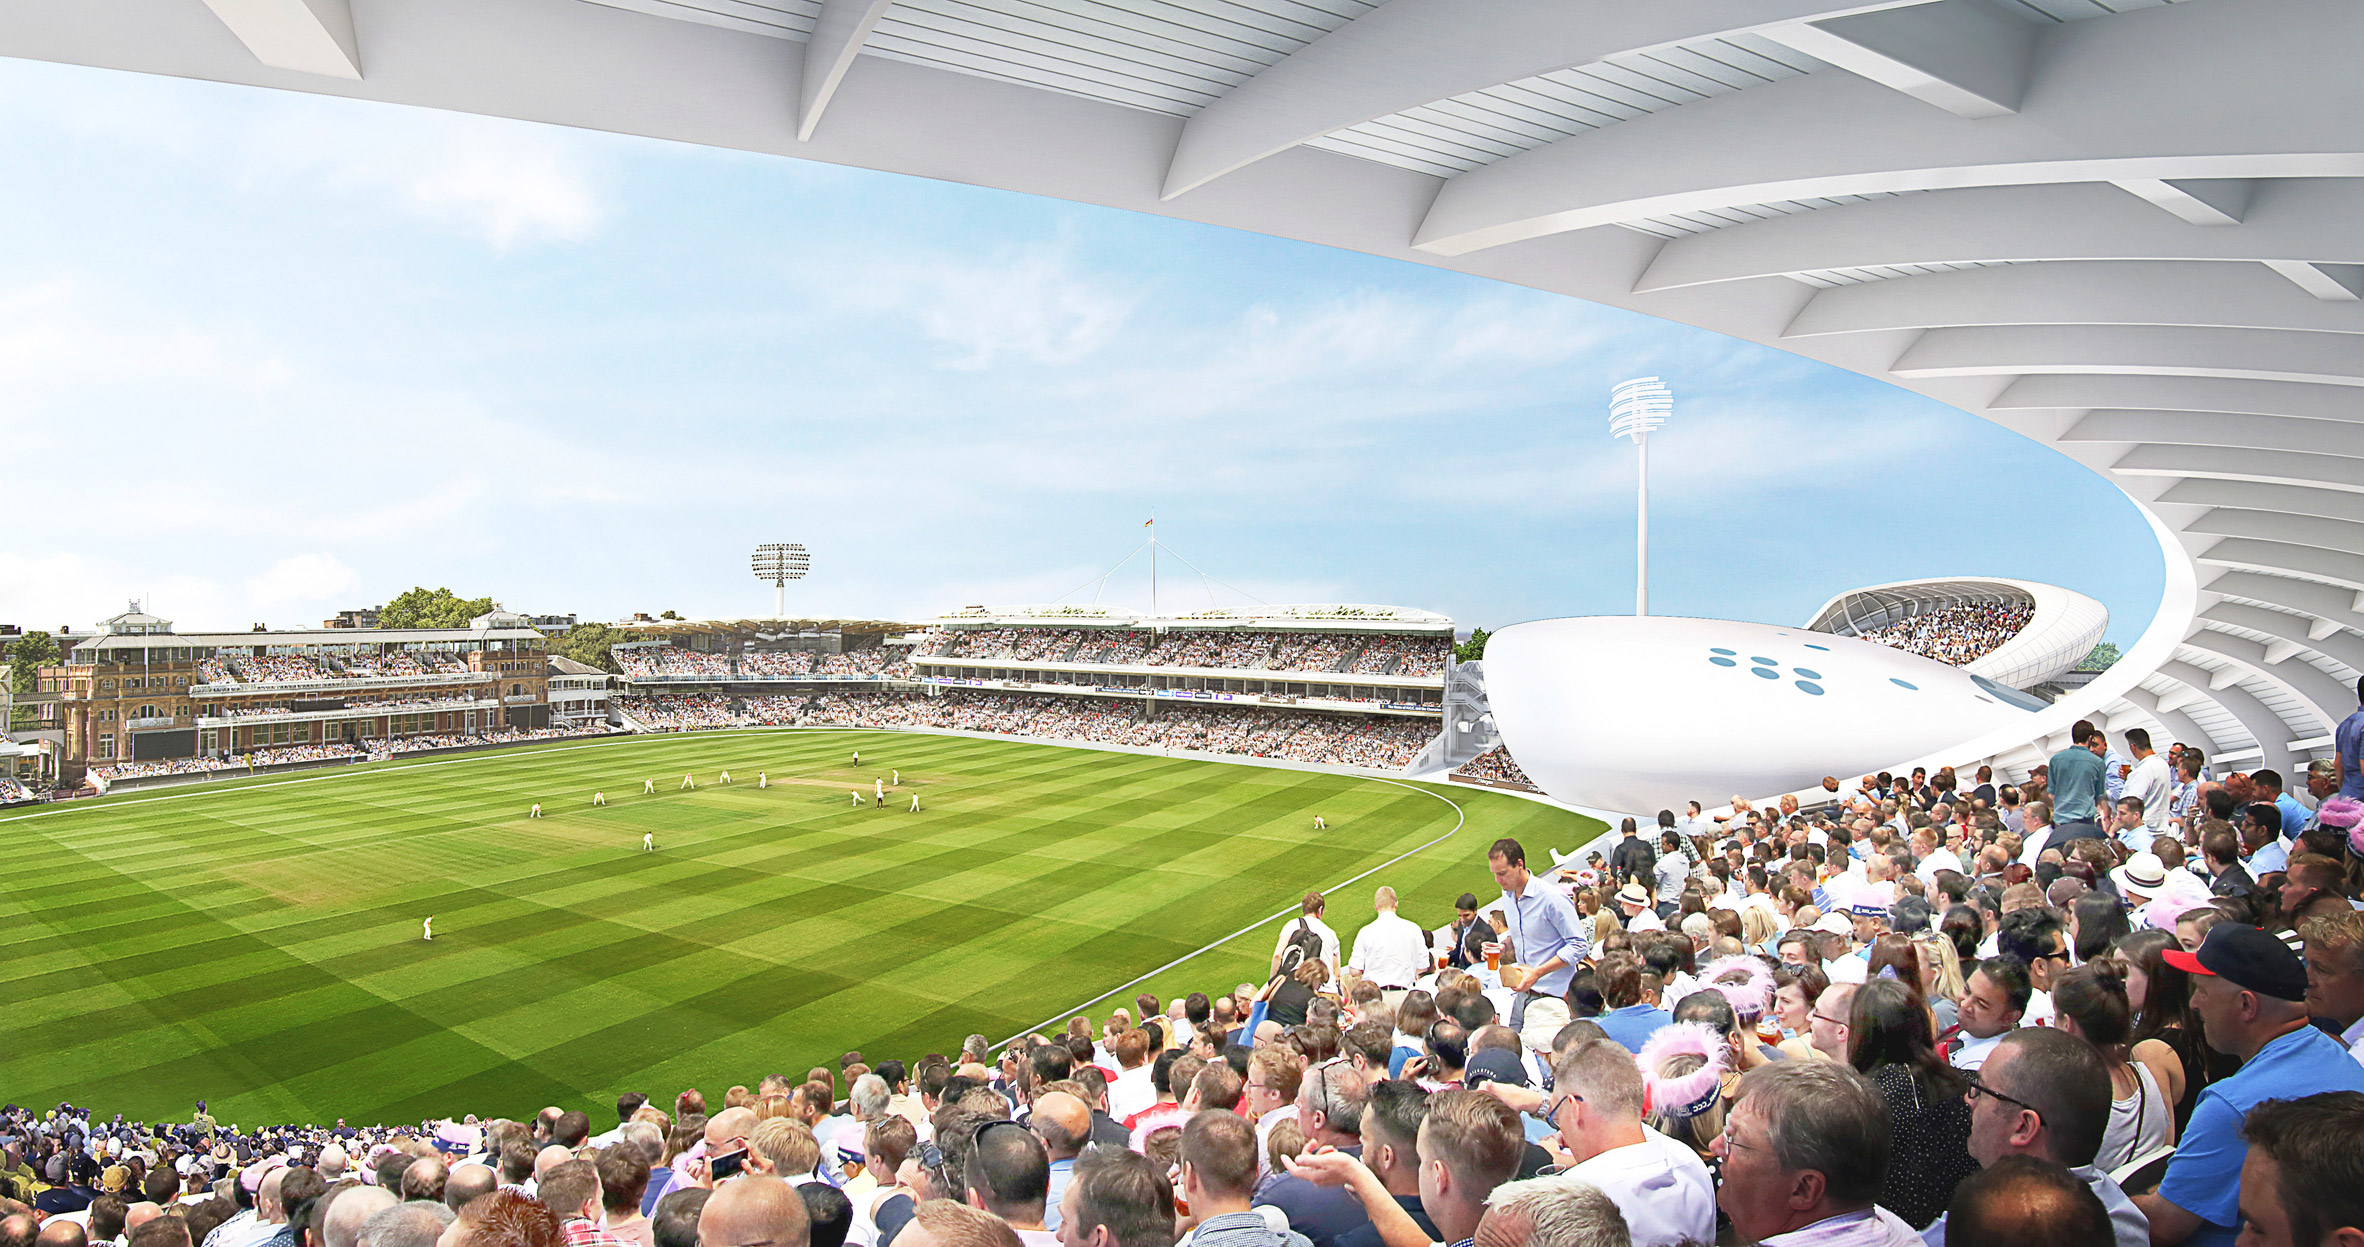 Wilkinson Eyre's latest designs for Lord's Cricket Ground stands revealed